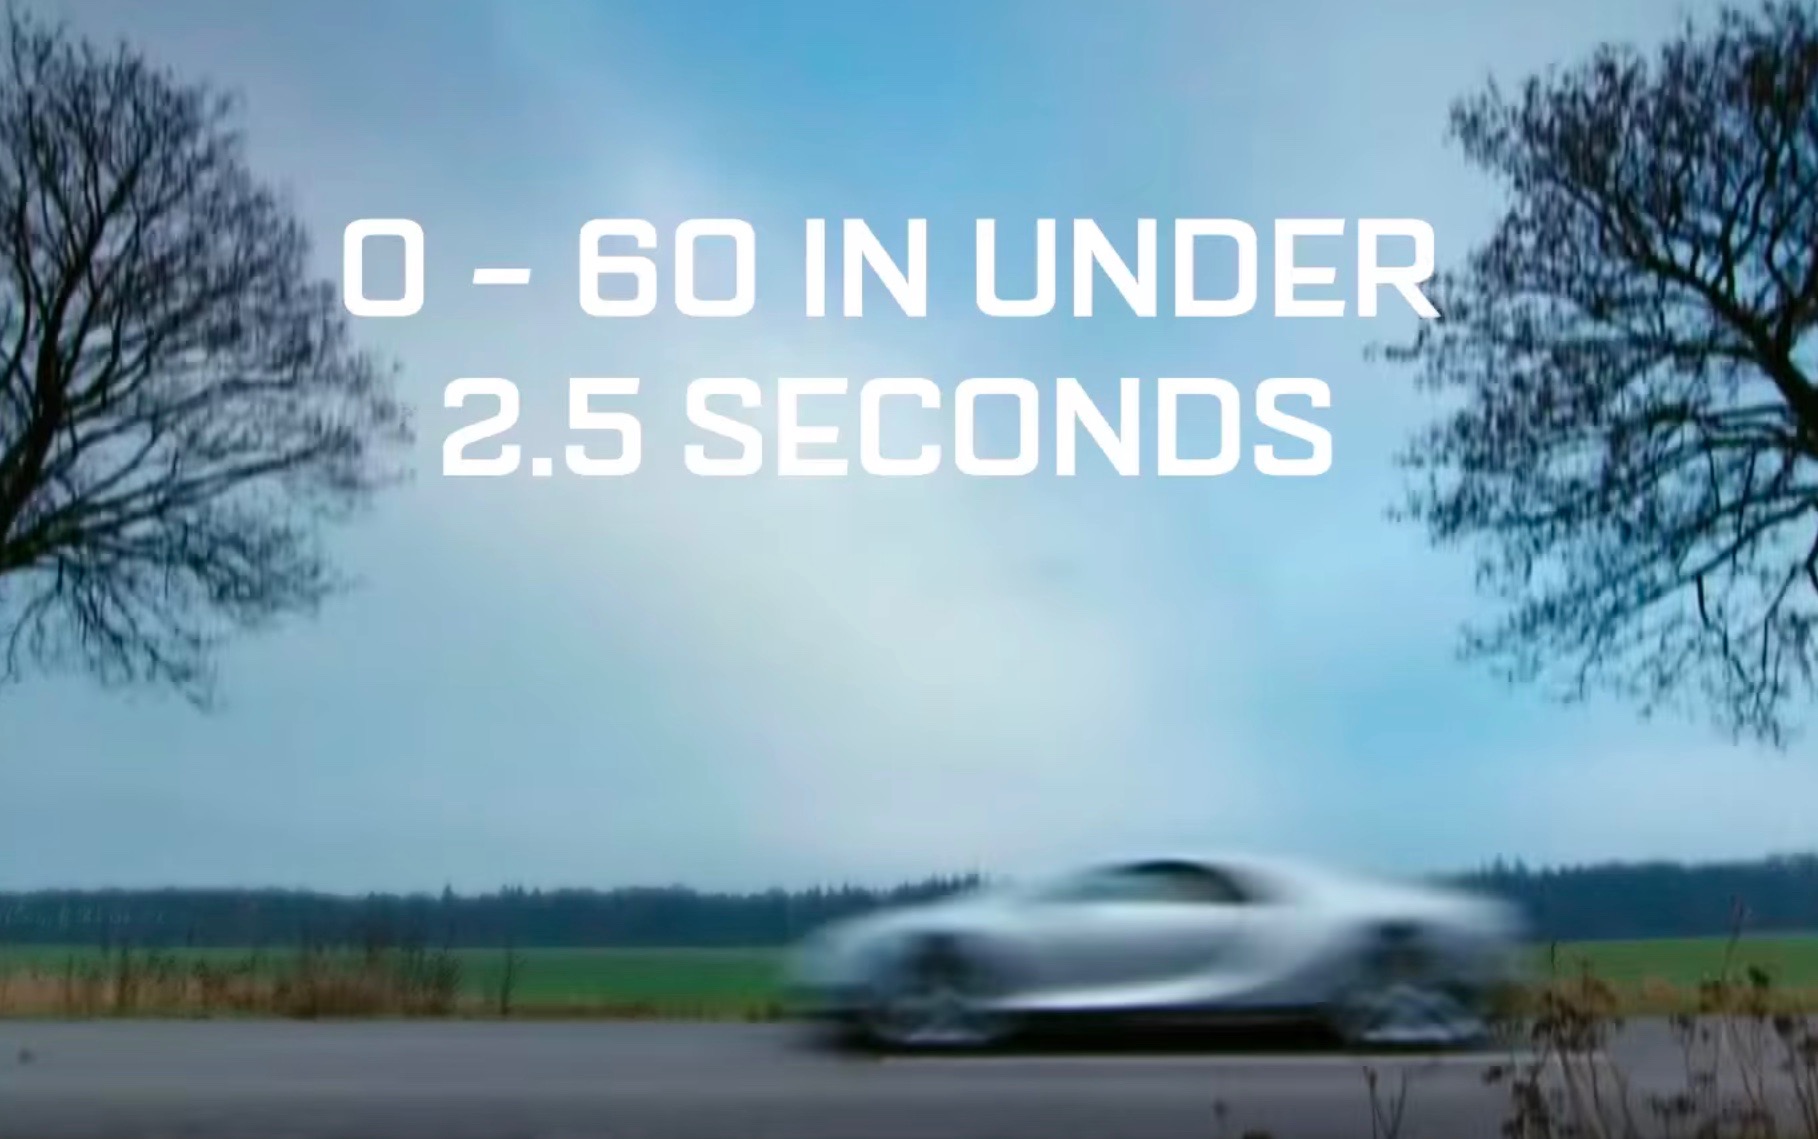 Video: The Grand Tour to set new top speed record in Bugatti Chiron?